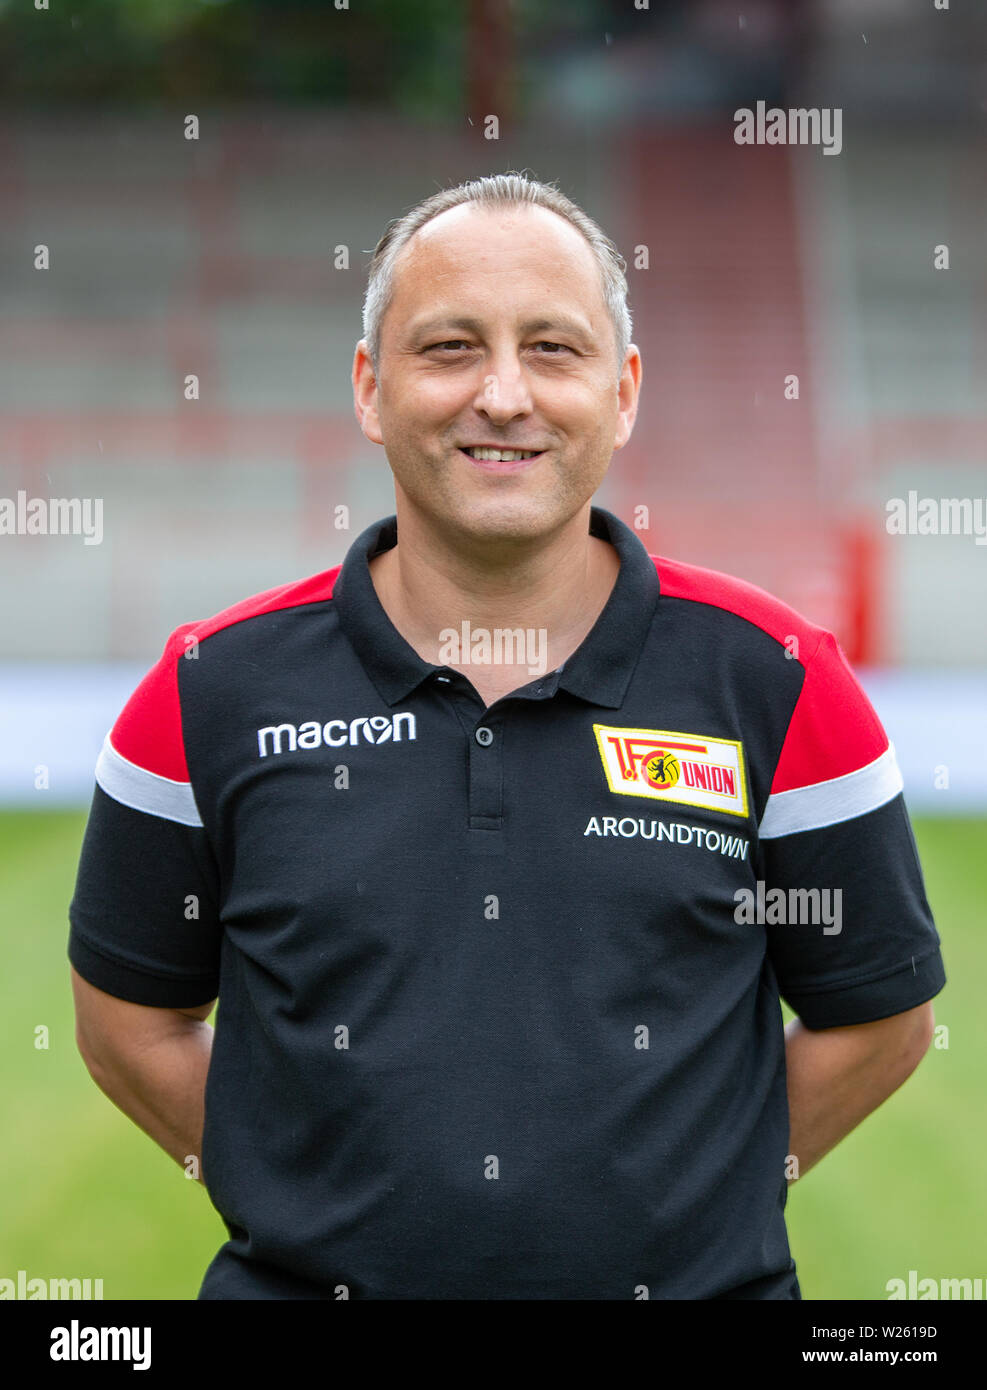 Berlin, Germany. 06th July, 2019. Soccer, Bundesliga: 1st FC Union Berlin photo session for the 2019/20 season. Masseur Thomas Riedel. Credit: Andreas Gora/dpa/Alamy Live News Credit: dpa picture alliance/Alamy Live News Stock Photo